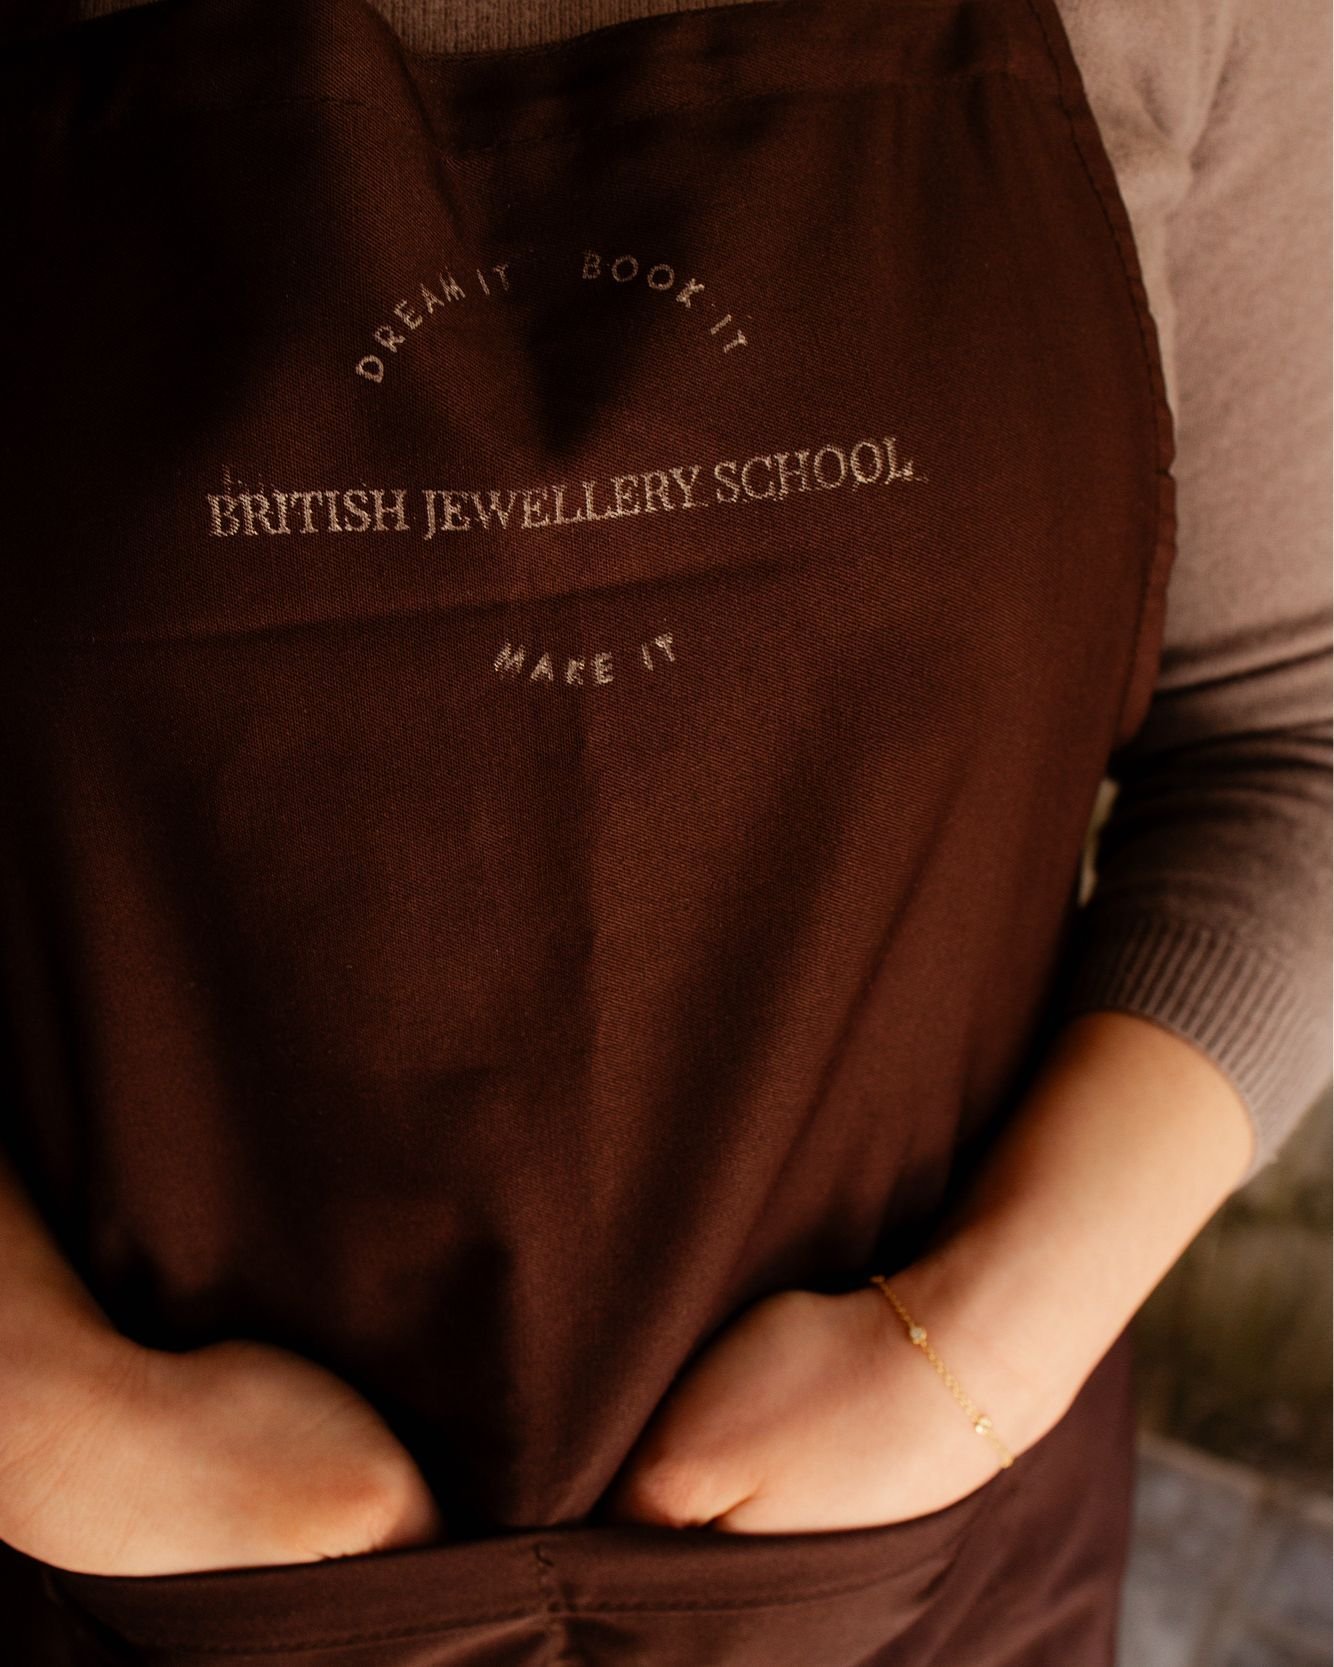 At the British Jewellery School, we offer a variety of workshops tailored to different skill levels and interests. From beginner classes focusing on basic techniques to advanced workshops exploring intricate designs, there's something for everyone. D